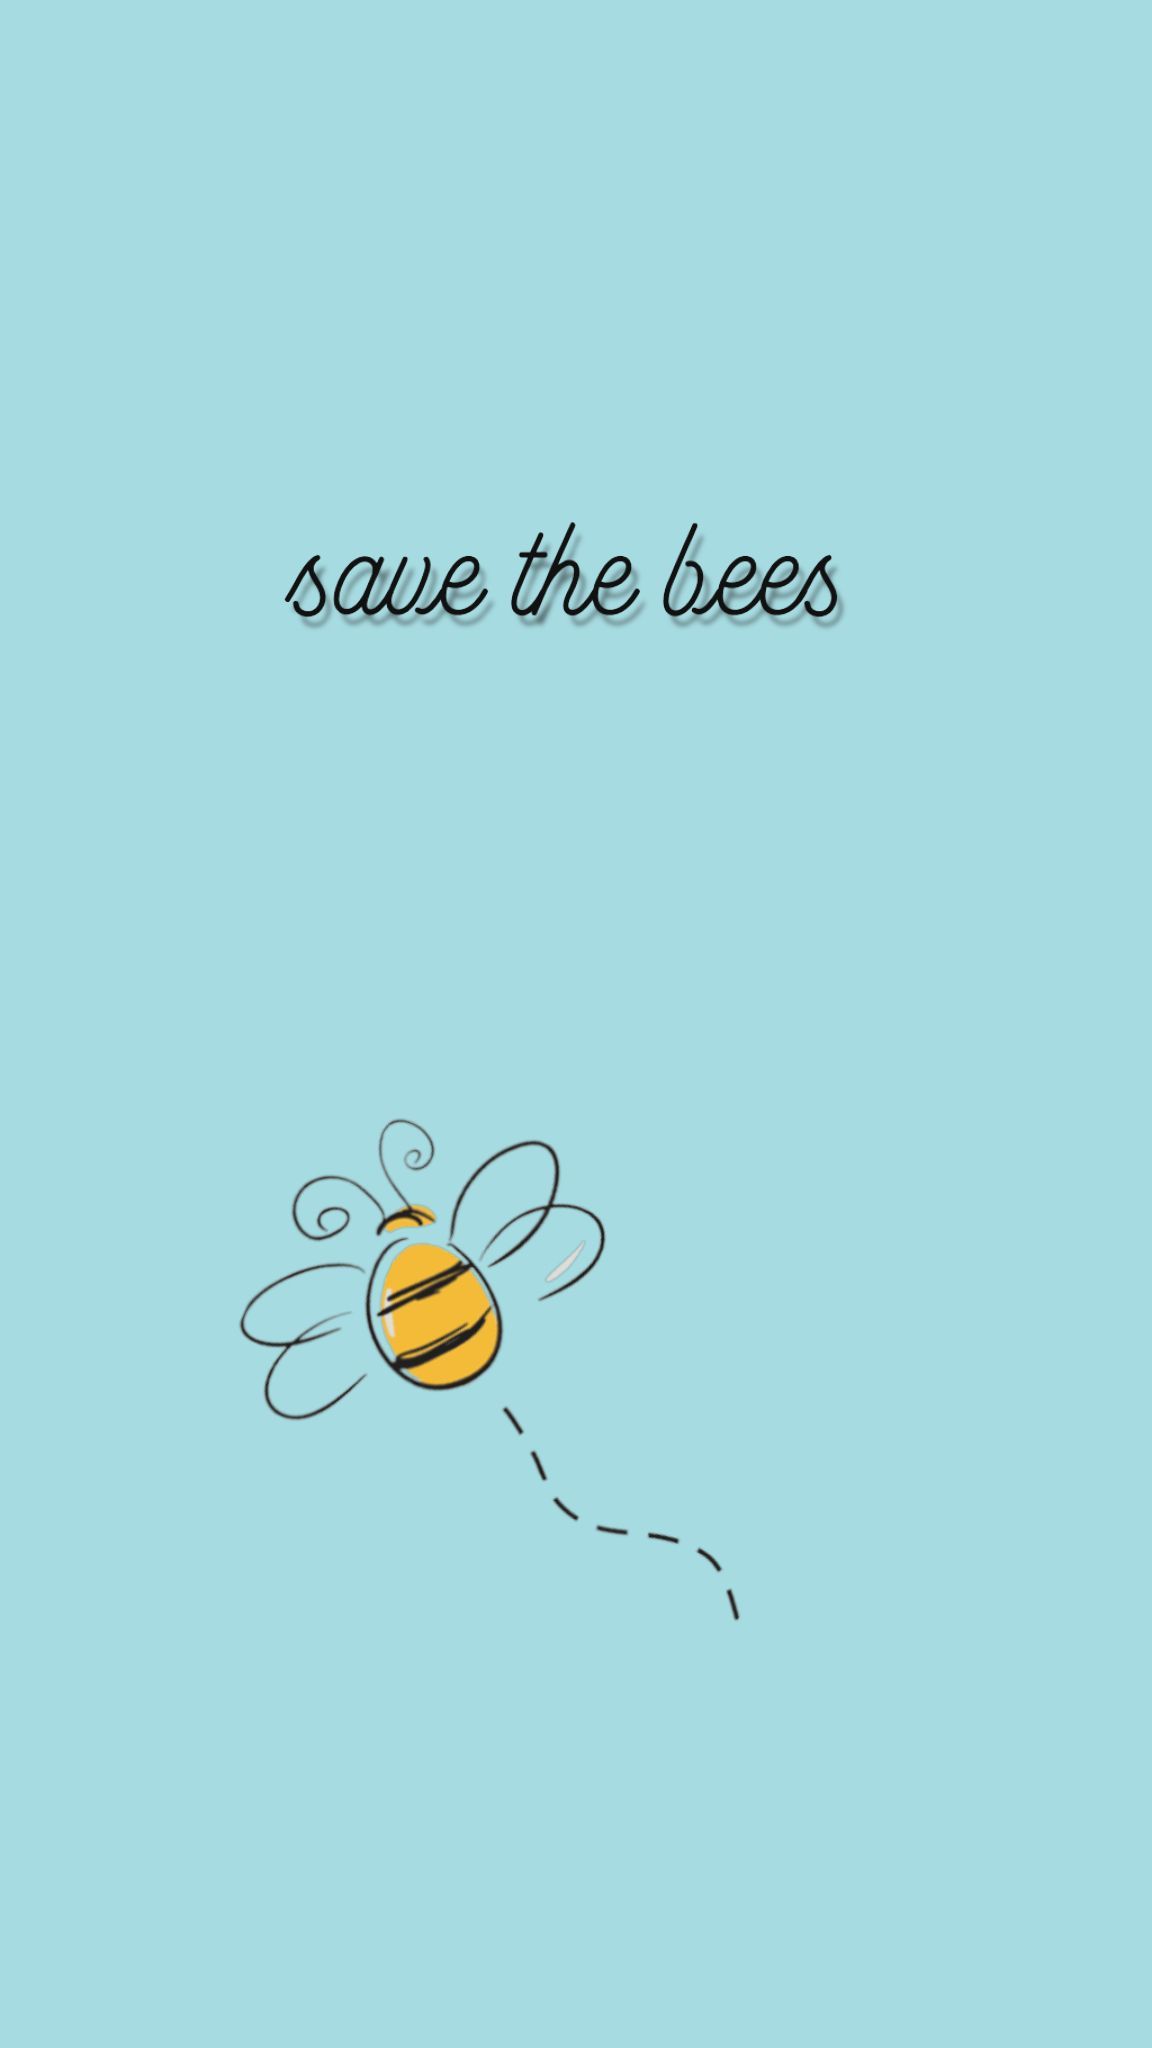 wallpaper. Poster, Save the bees, Movies